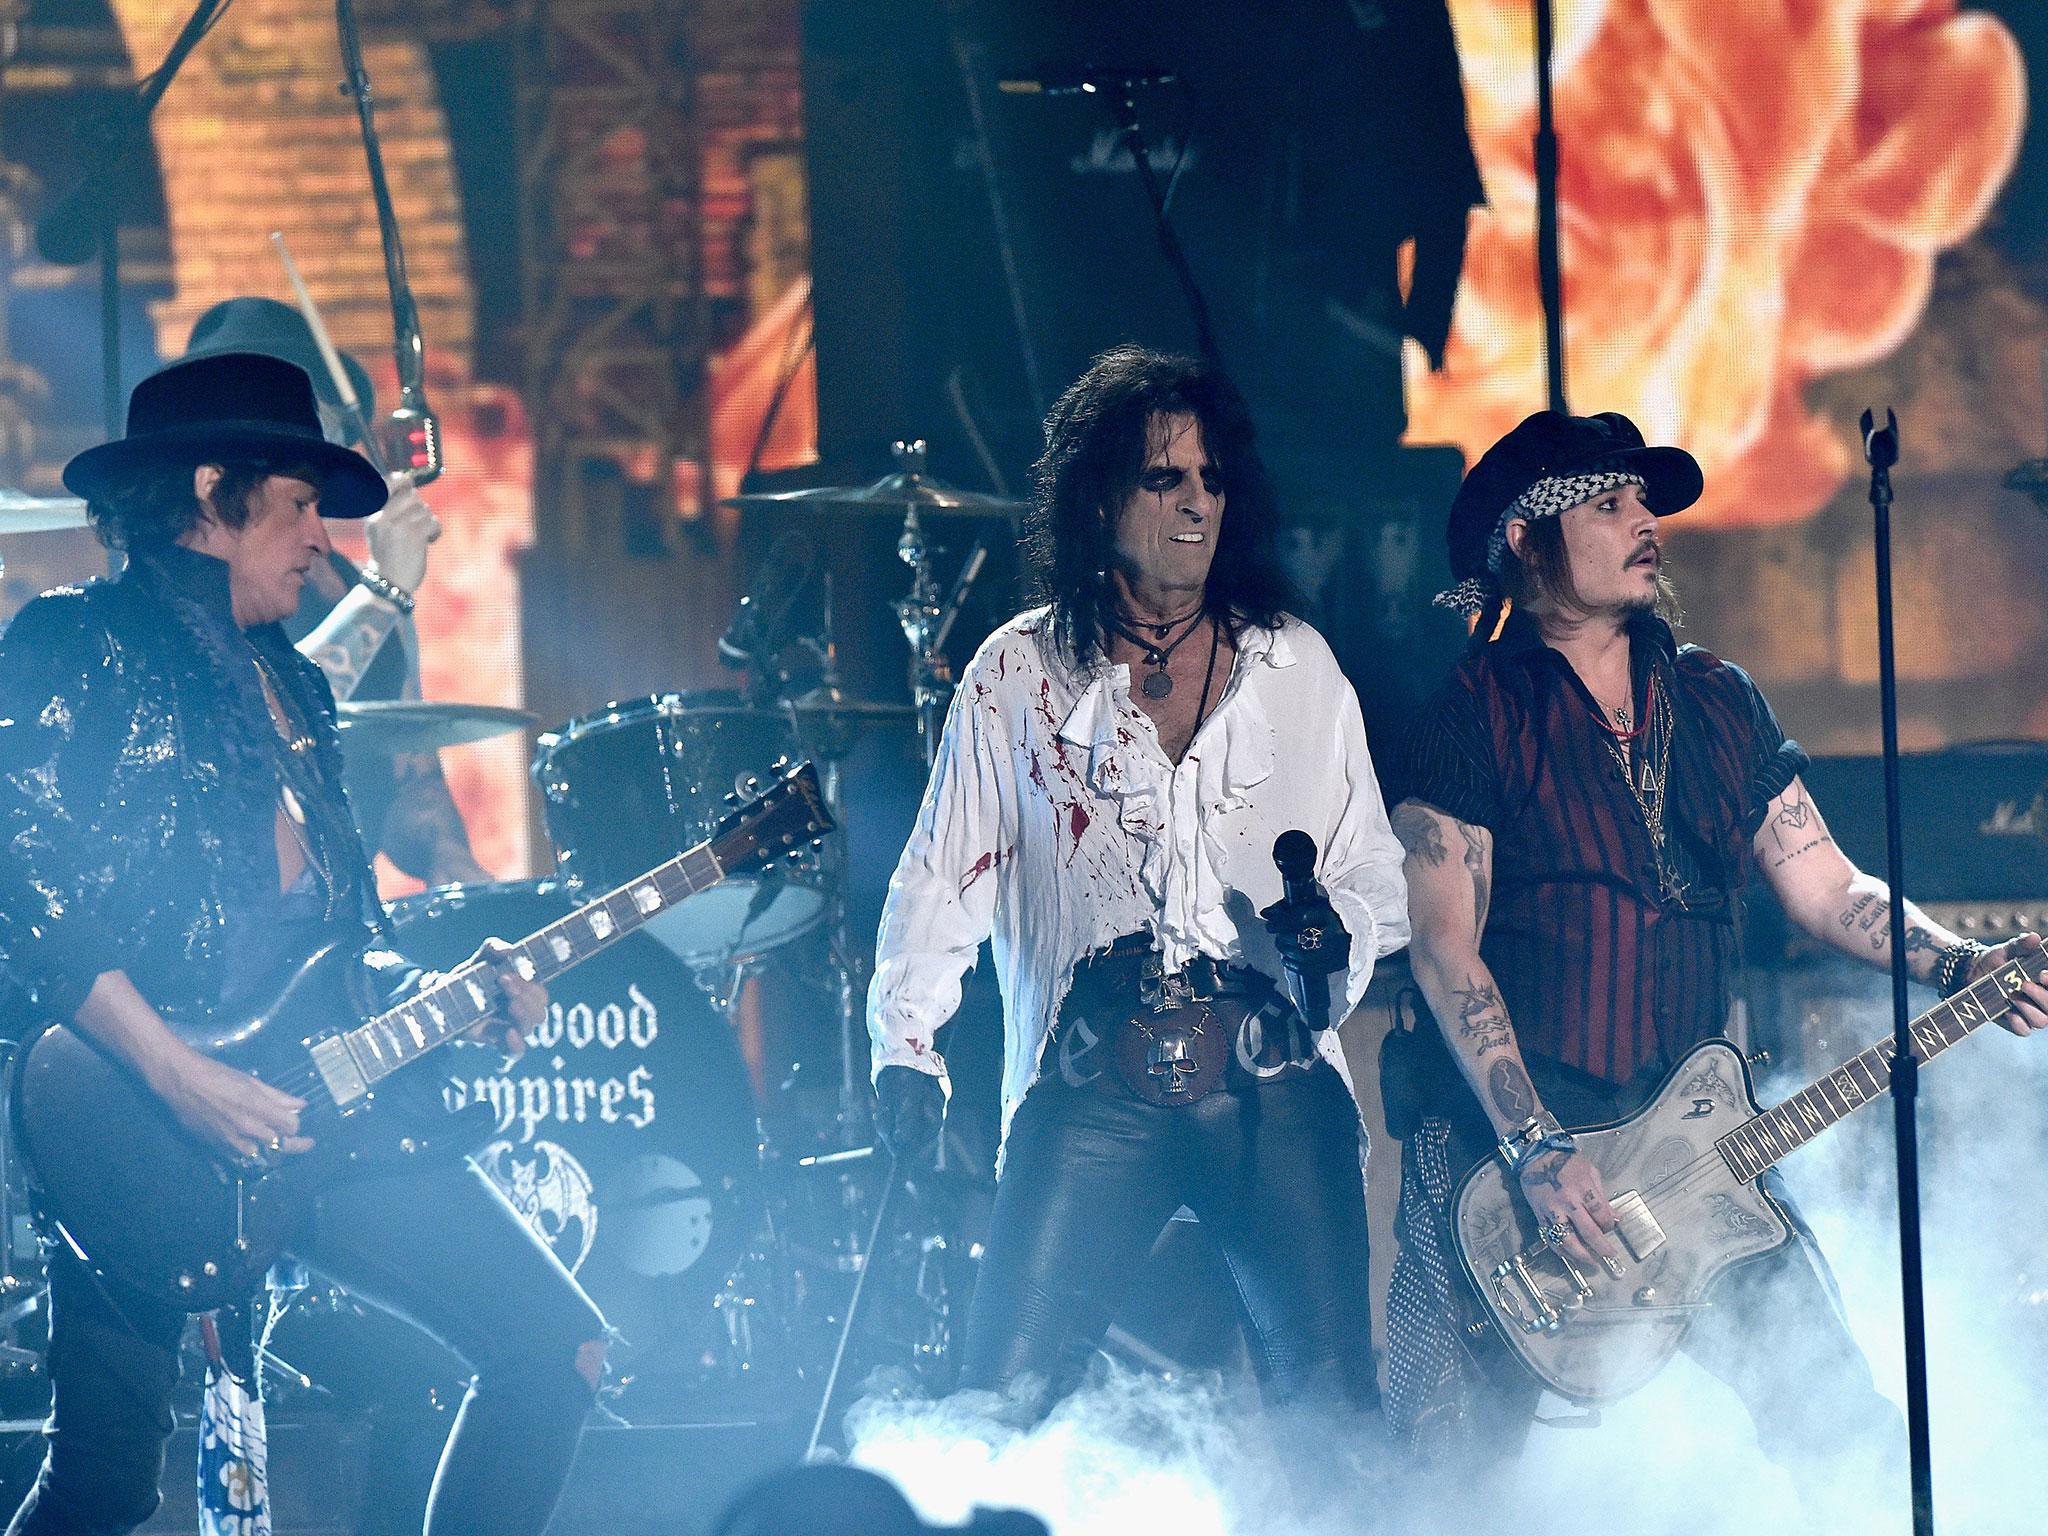 Joe Perry, Alice Cooper and Johnny Depp perform as Hollywood Vampires